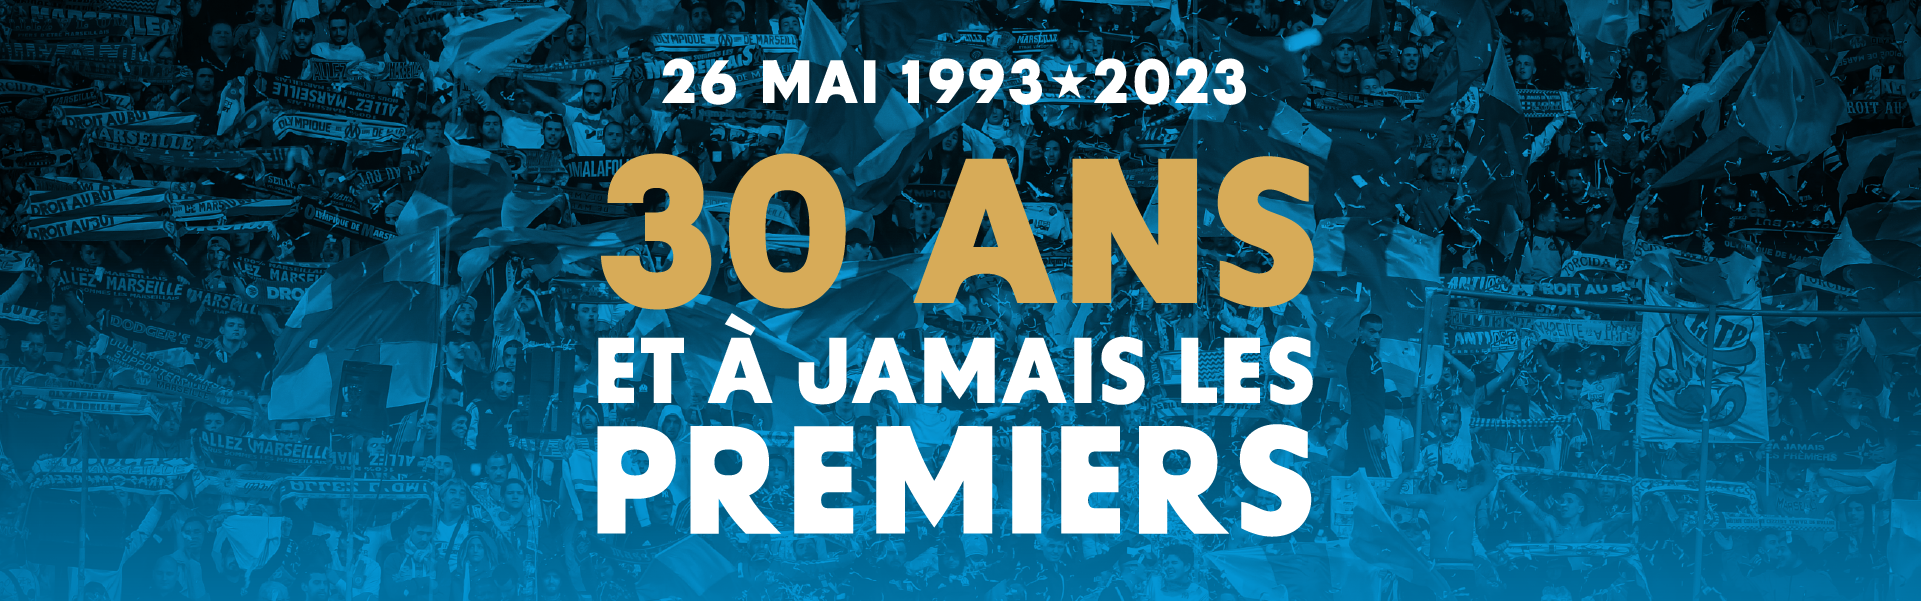 https://www.marseille.fr/sites/default/files/styles/custom_poster_1281x400/public/2023/05/om_30ans-pano.png